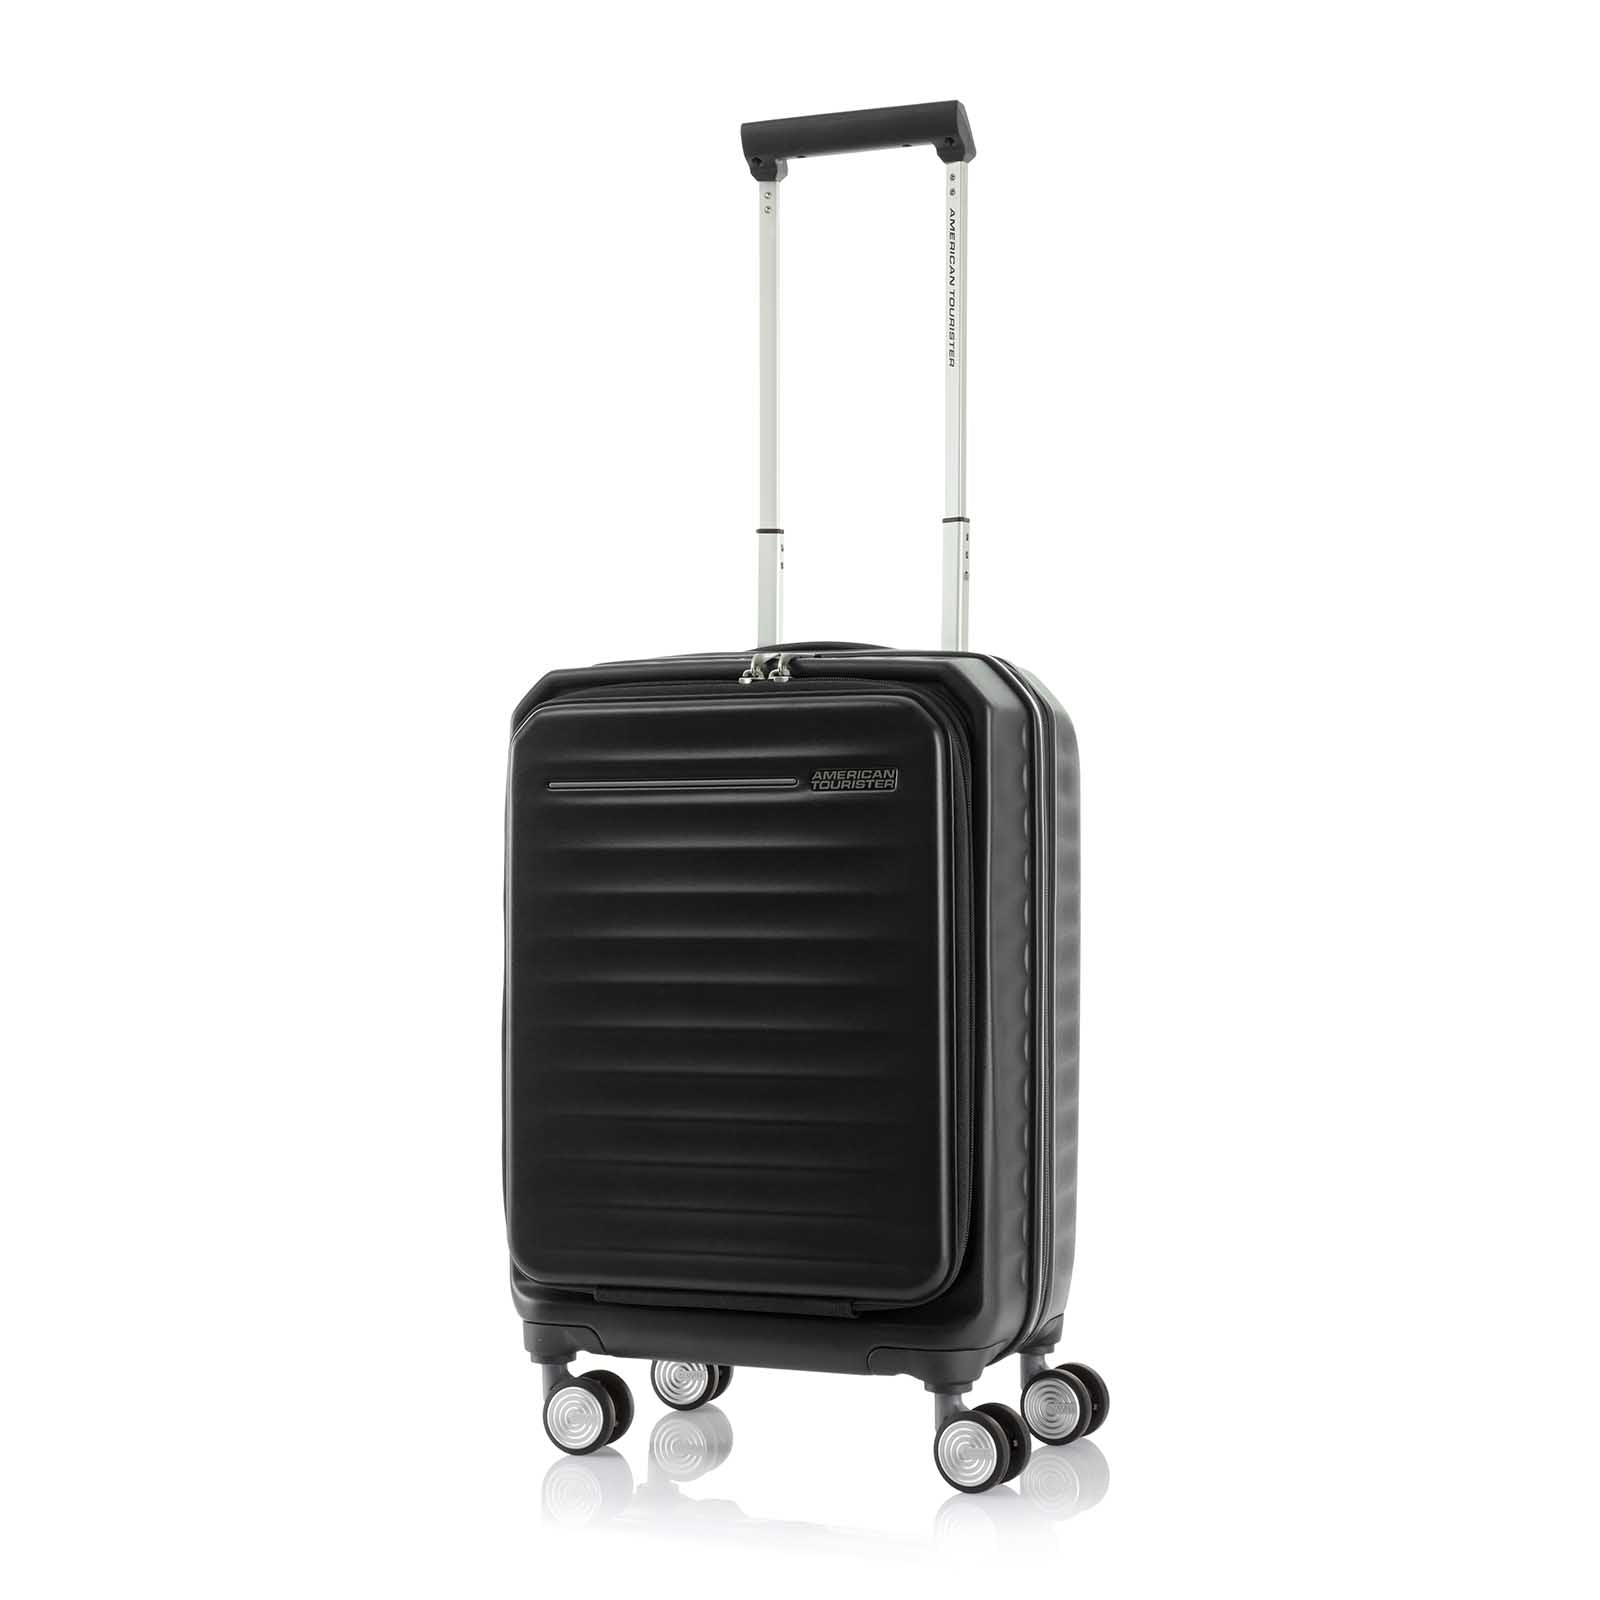 American-Tourister-Frontec-54cm-Suitcase-Jet-Black-Front-Angle